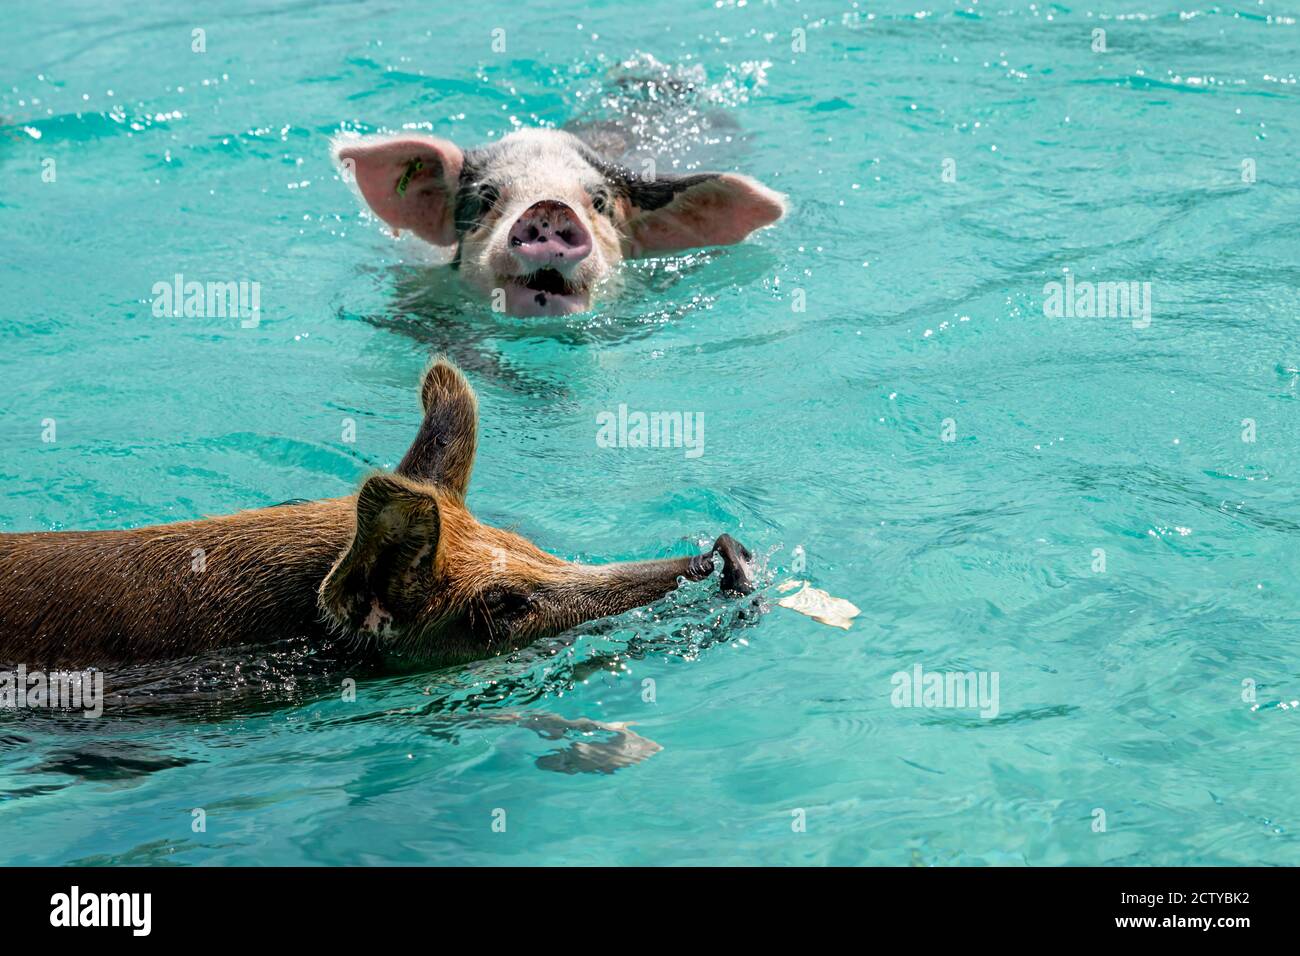 The famous swimming pigs (feral pigs) of Bahamas living in an uninhabited island located in Exuma called Big Major Cay (better known as Pig island). Stock Photo